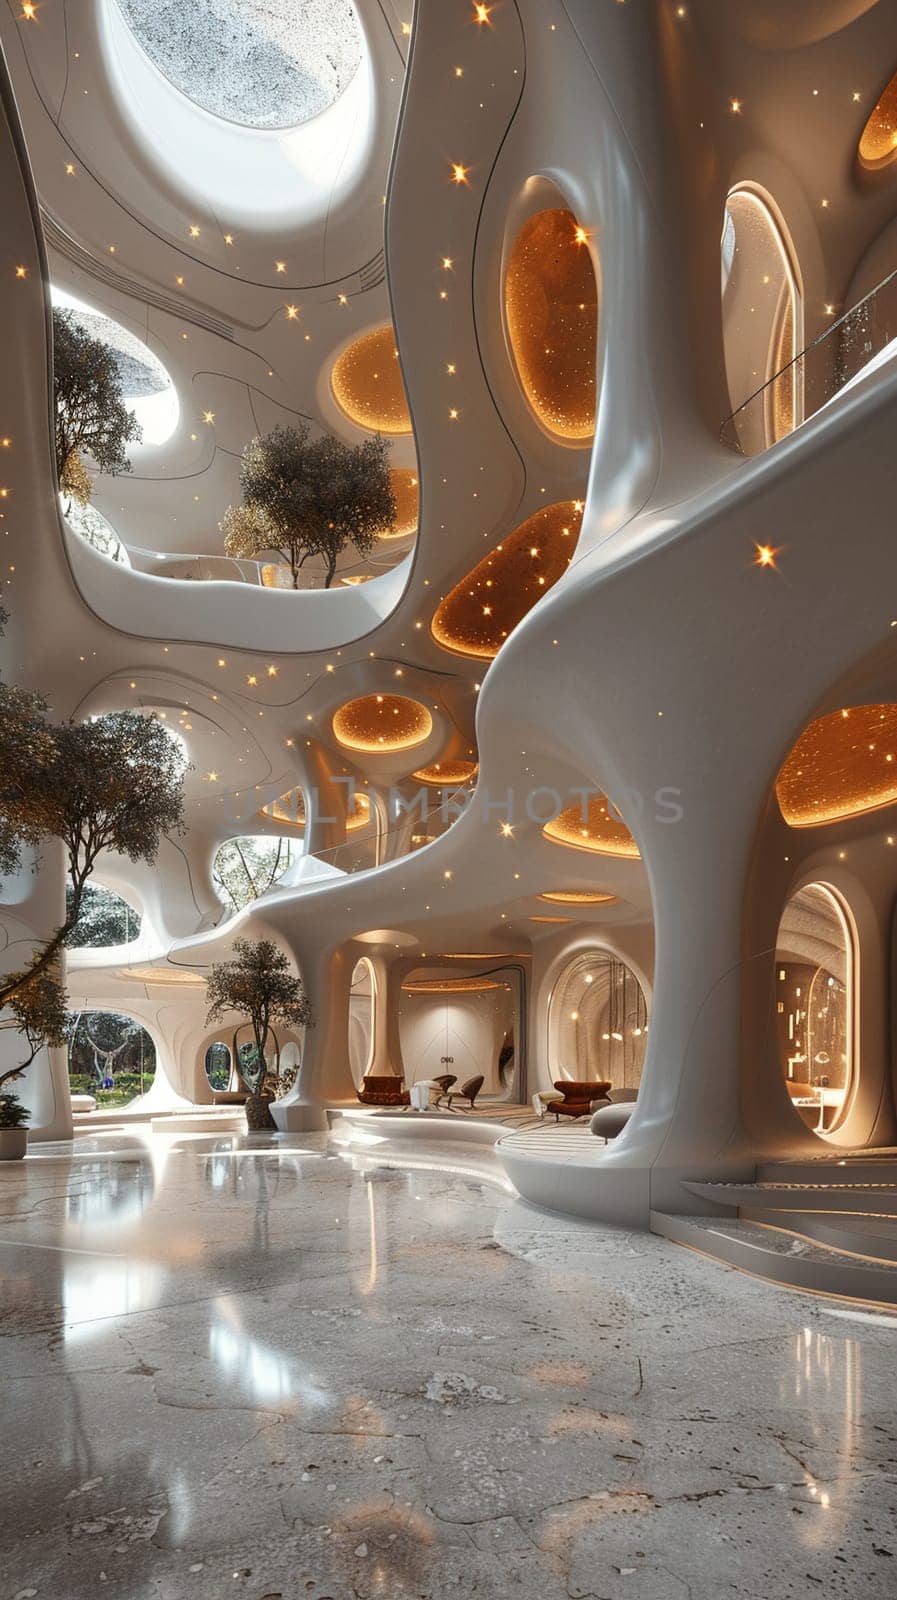 Futuristic lobby with interactive installations and high-tech featuresHyperrealistic